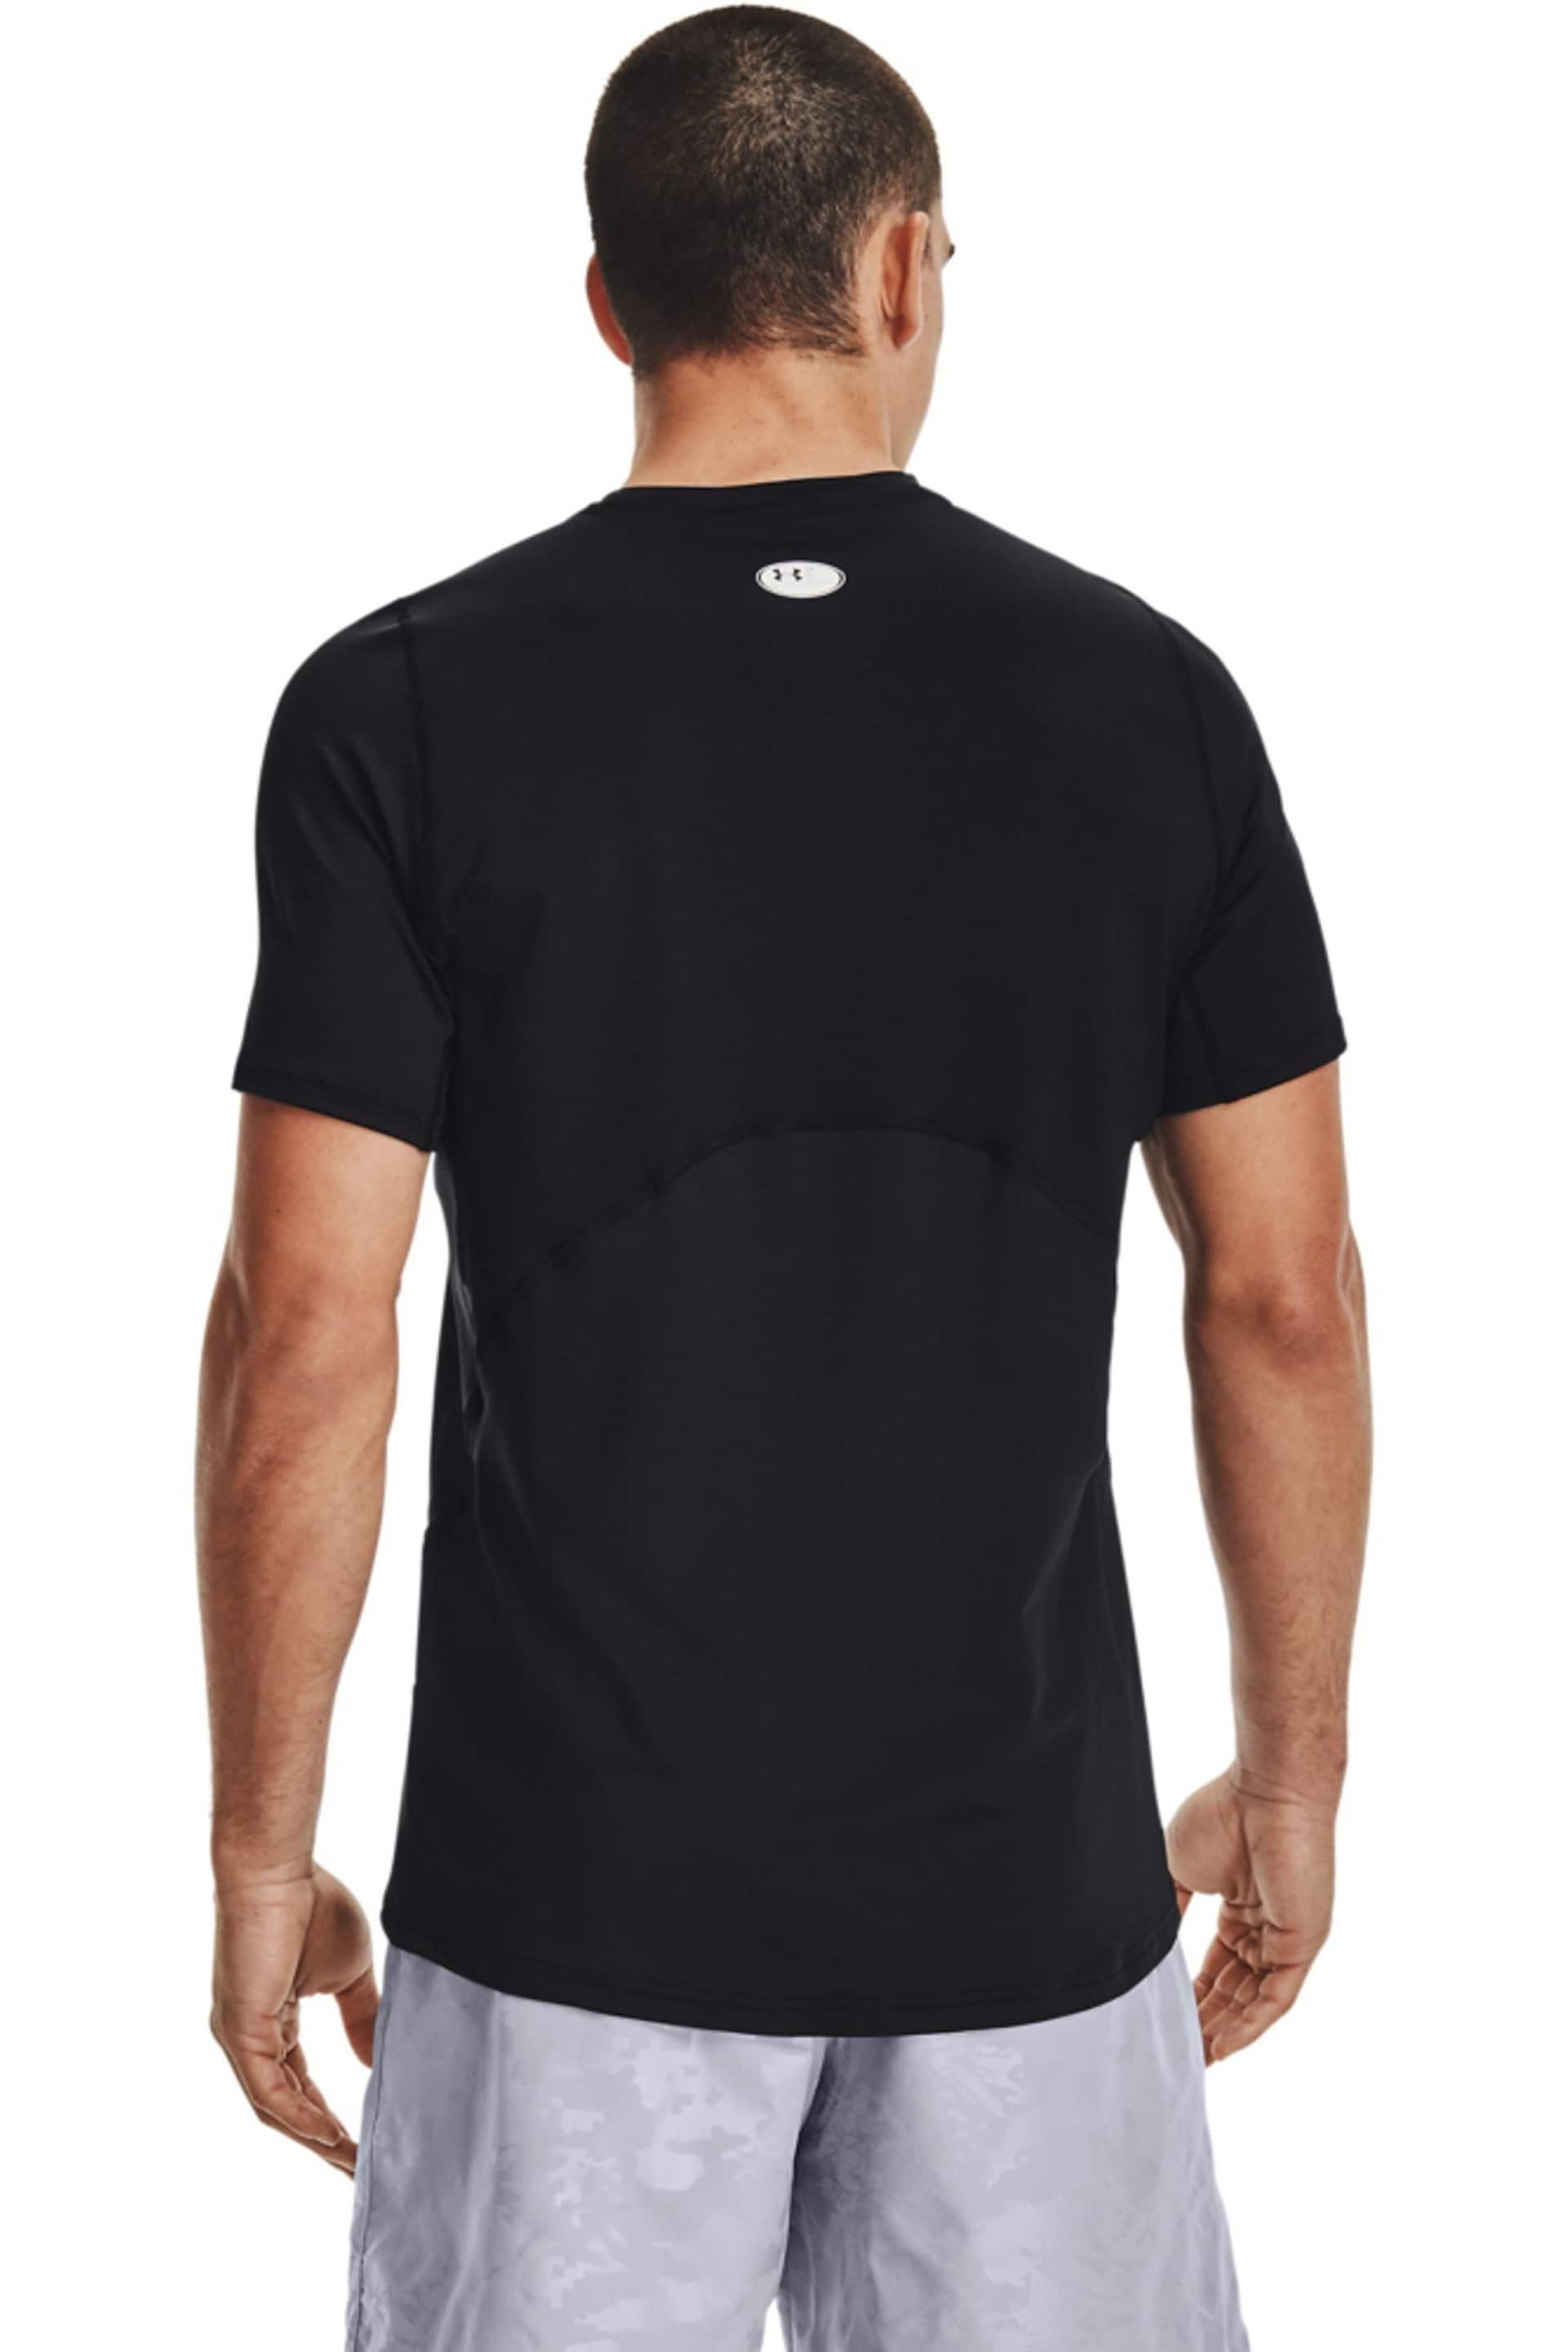 Under Armour Black Heat Gear Fitted T-Shirt - Image 2 of 7